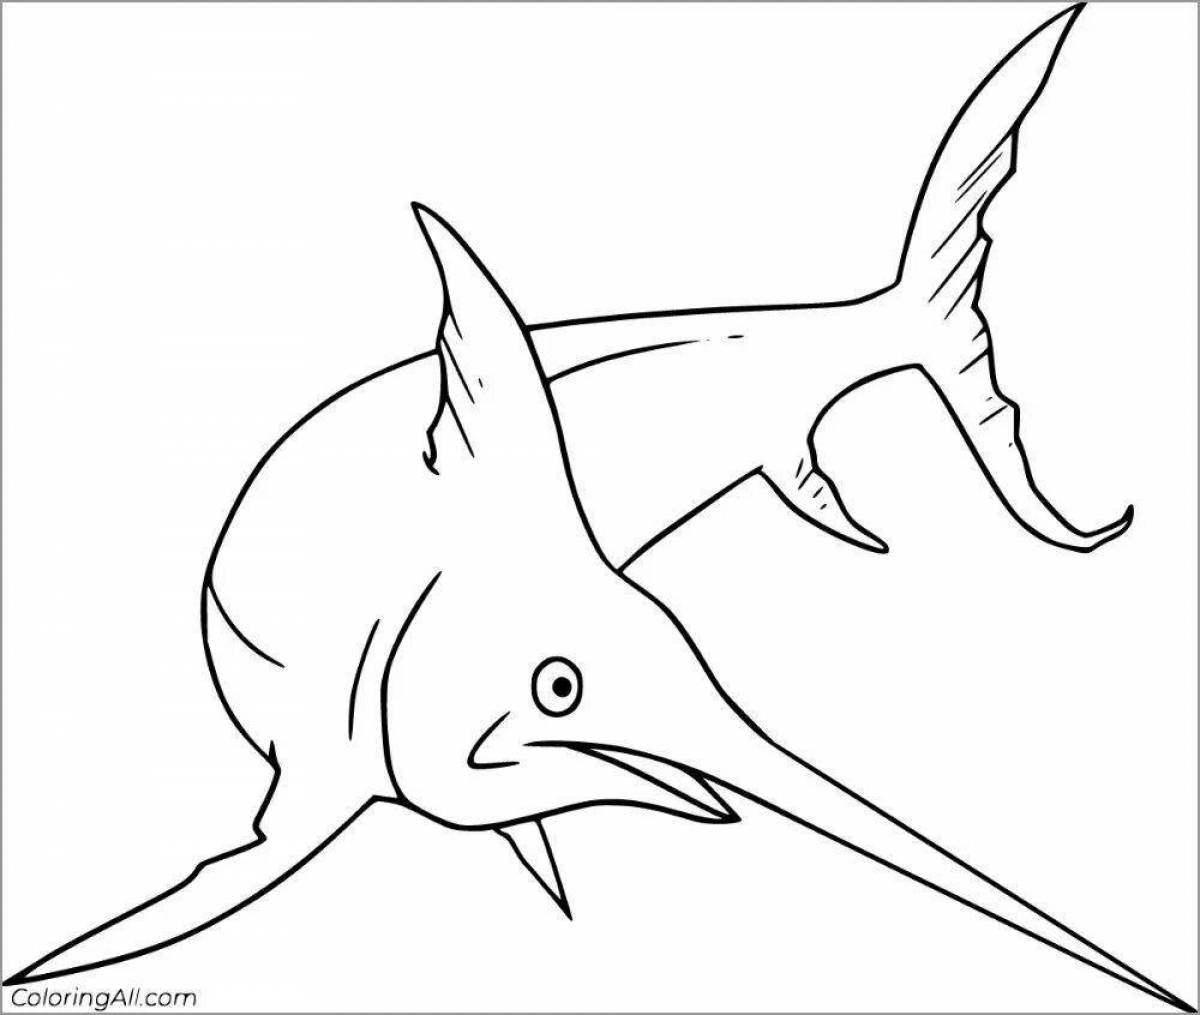 A fascinating swordfish coloring page